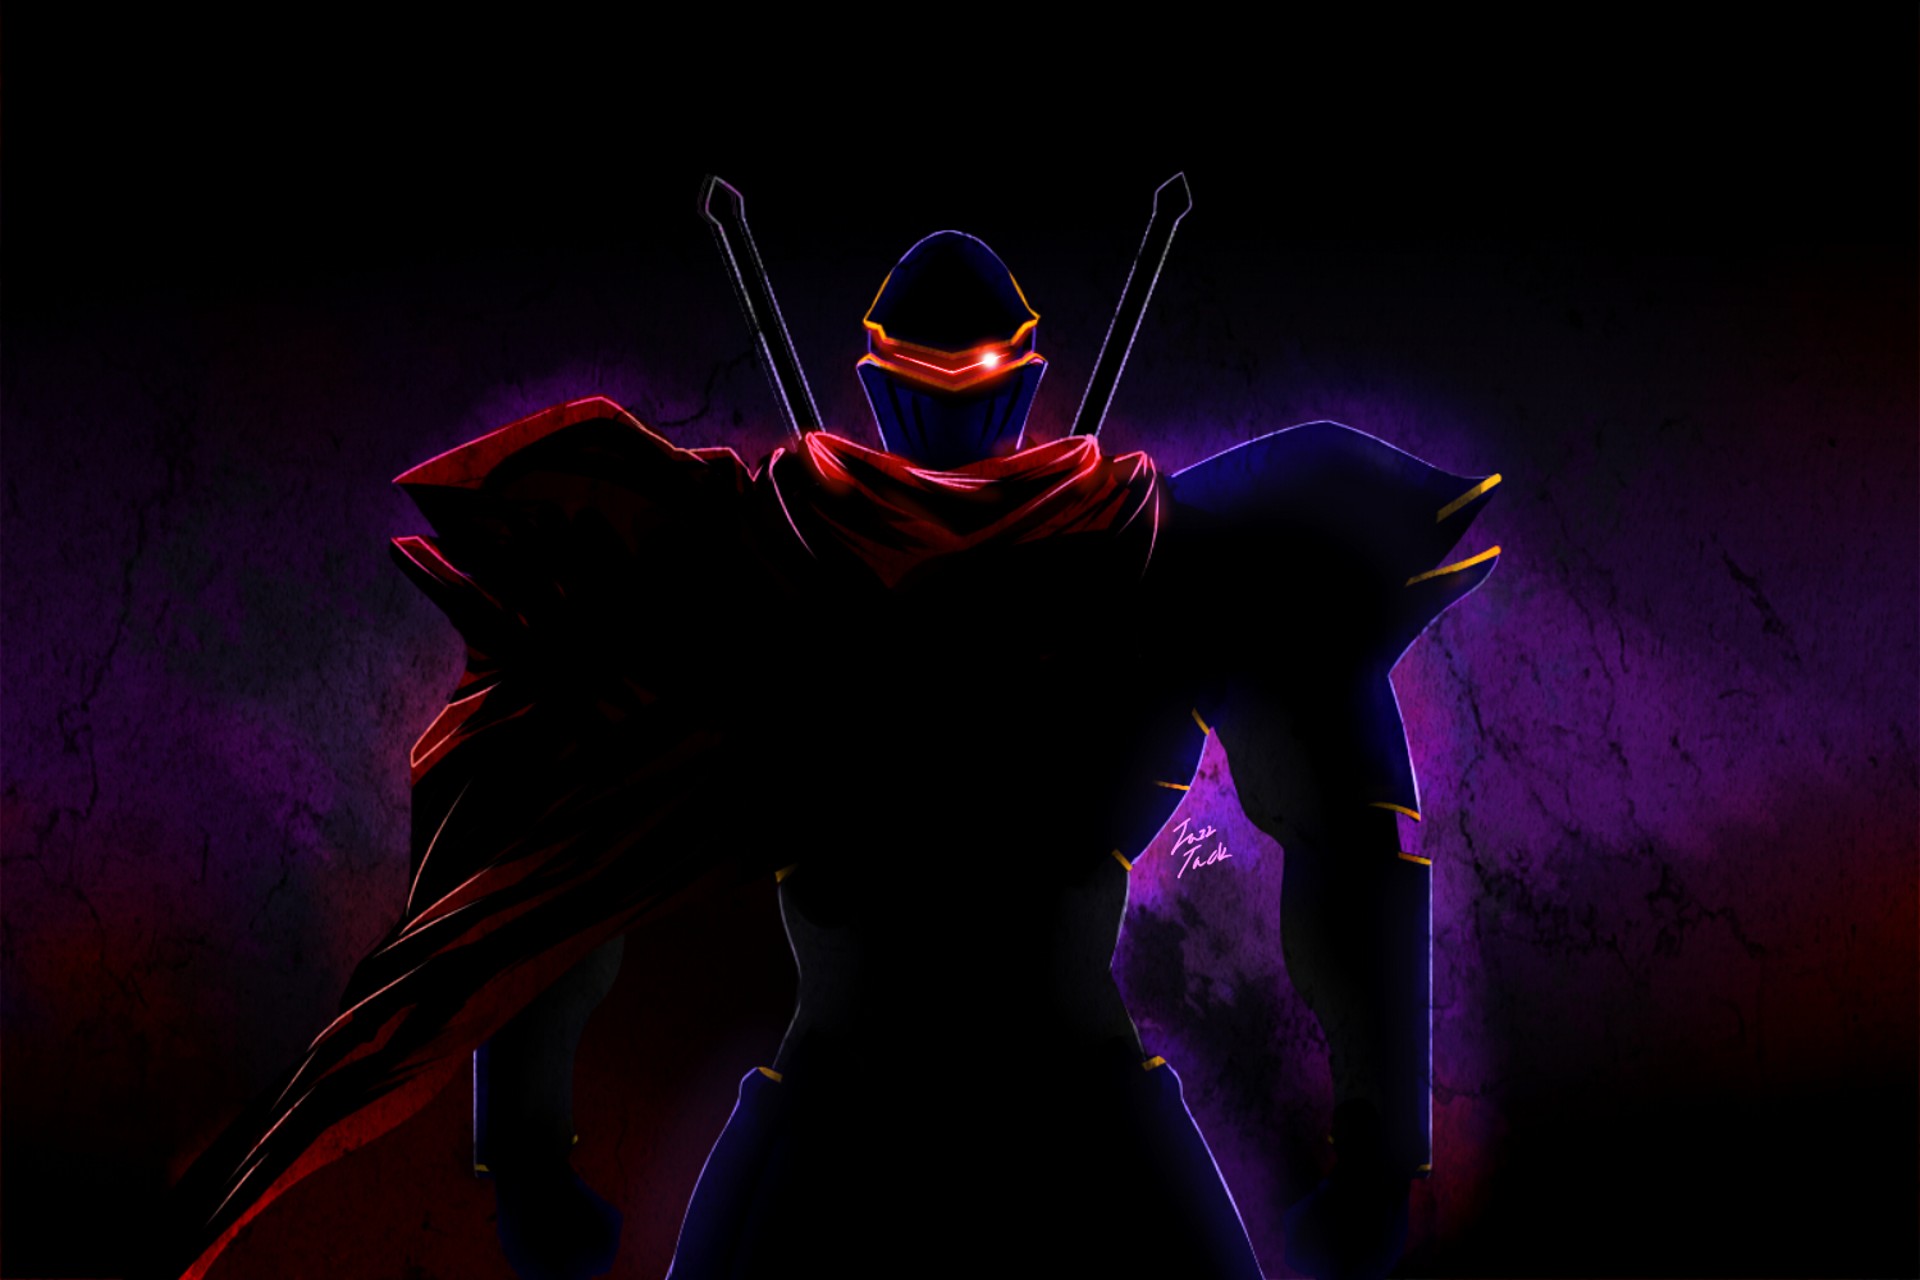 Overlord Anime wallpaper ·① Download free stunning ...